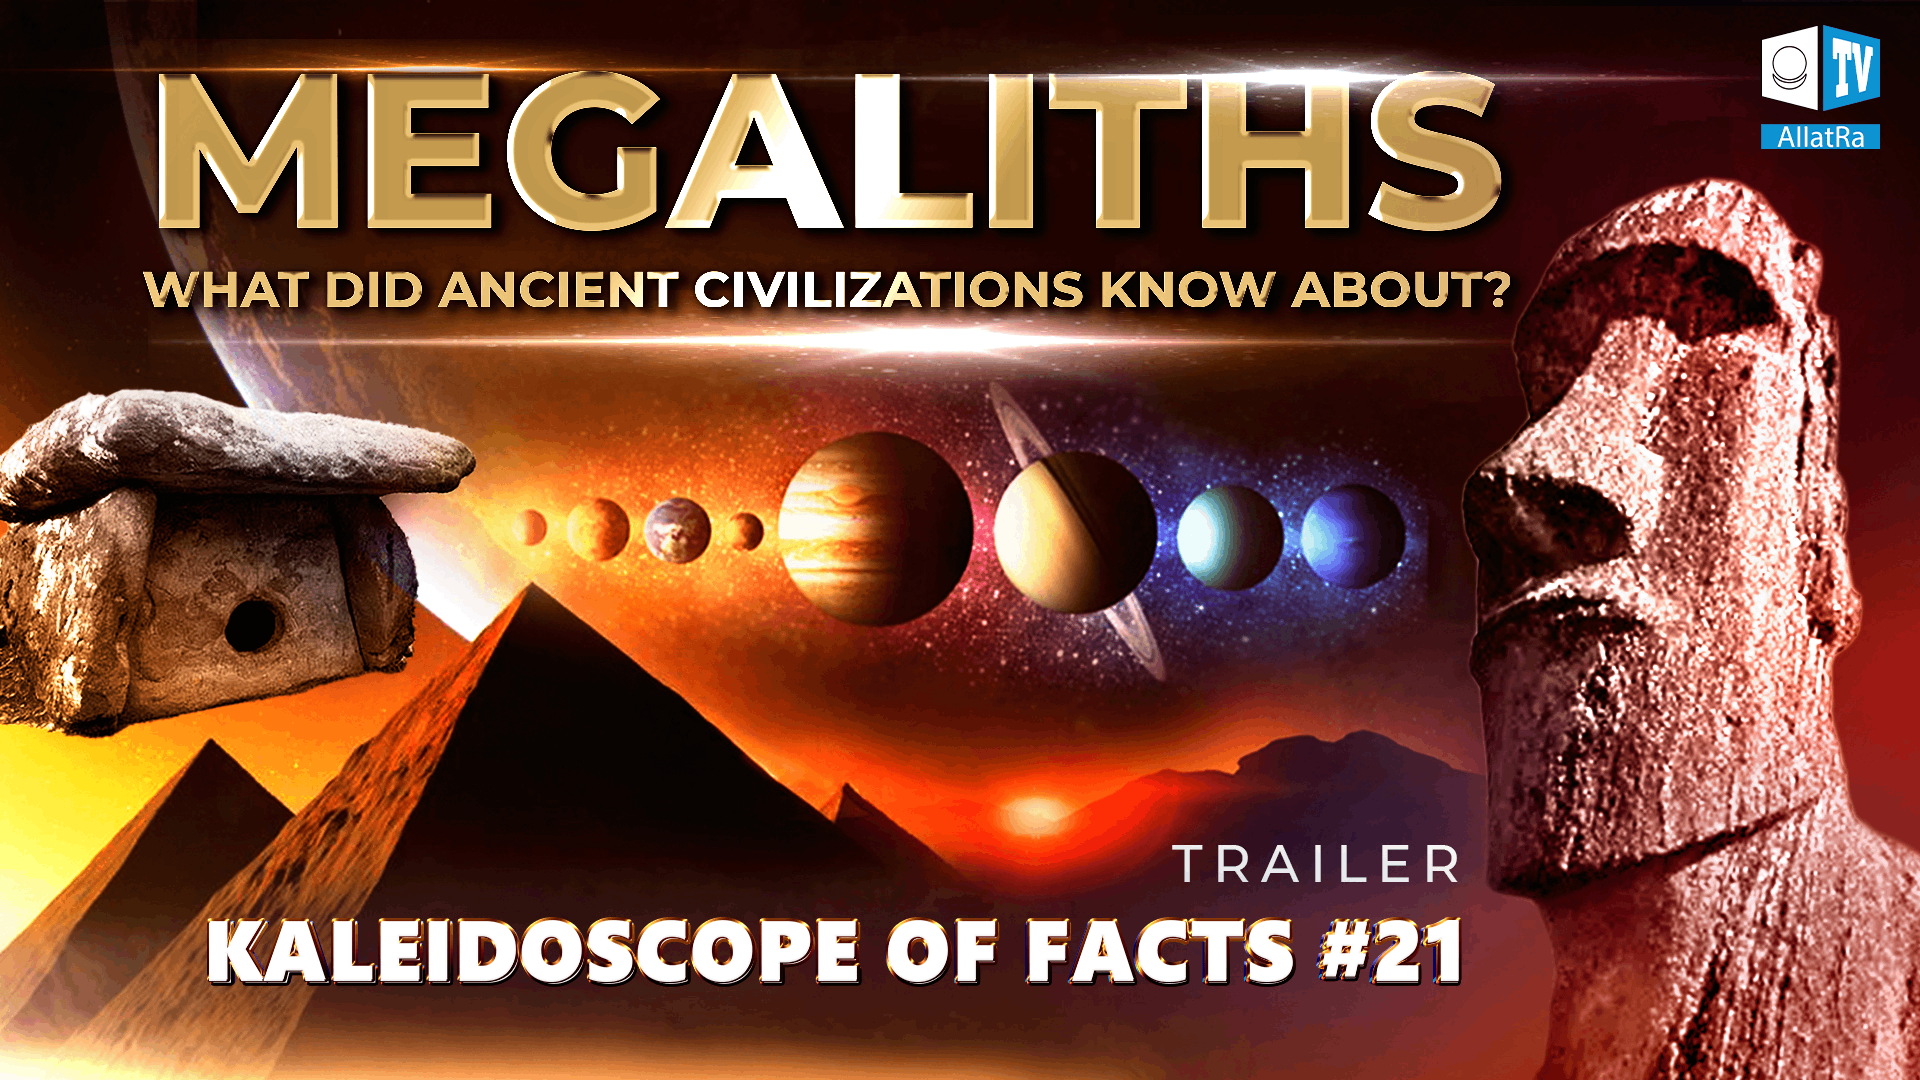 Mysteries of Ancient Civilizations. Megaliths and Artifacts | Kaleidoscope of Facts 21. Trailer